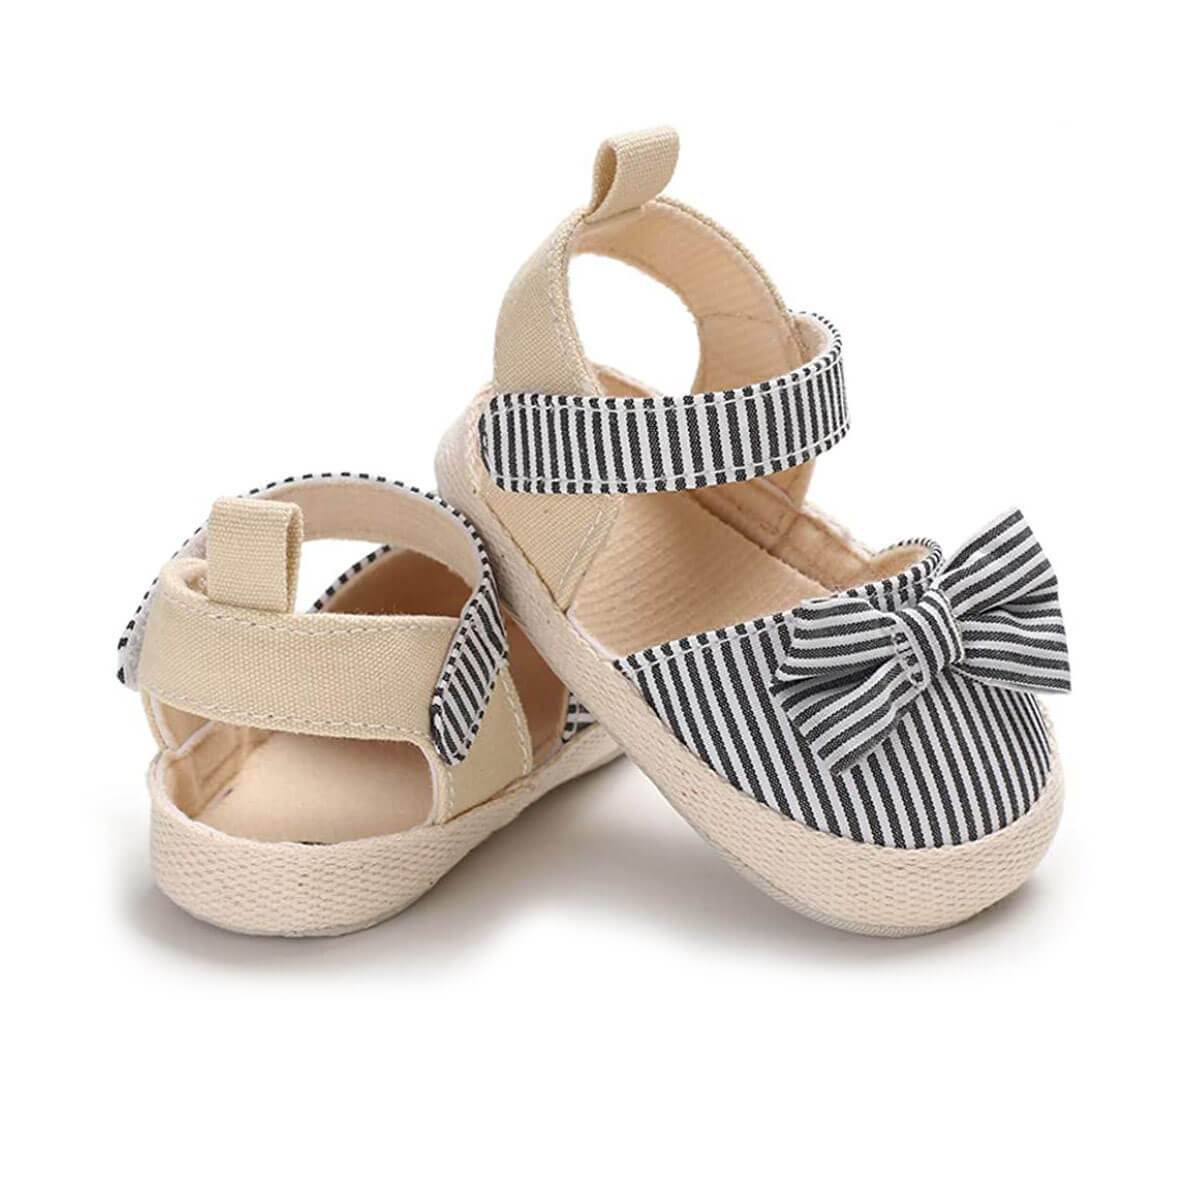 Striped Bowknot Baby Sandals   